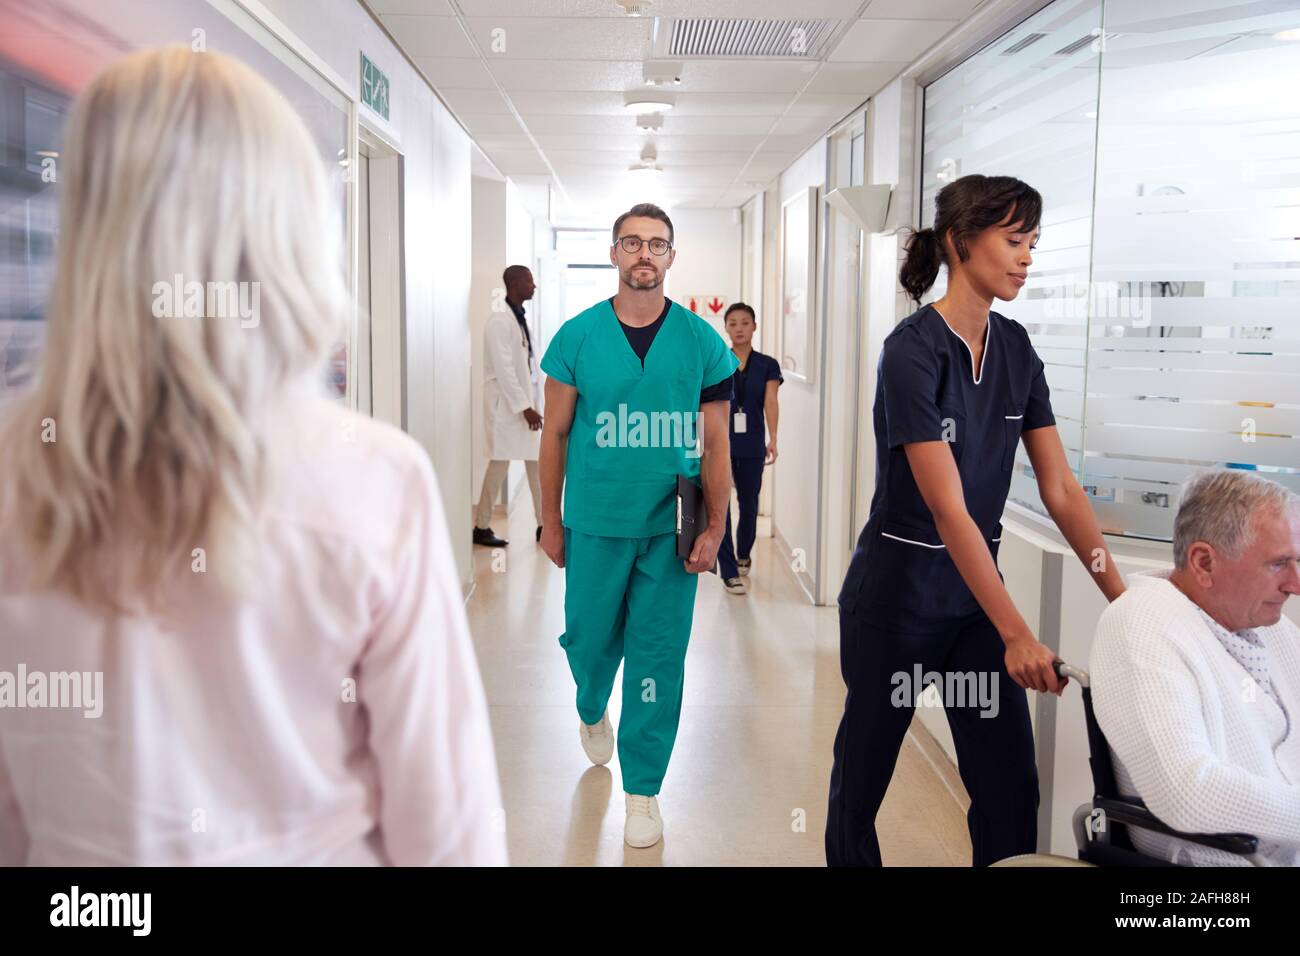 Busy Hospital Corridor With Medical Staff And Patients Stock Photo